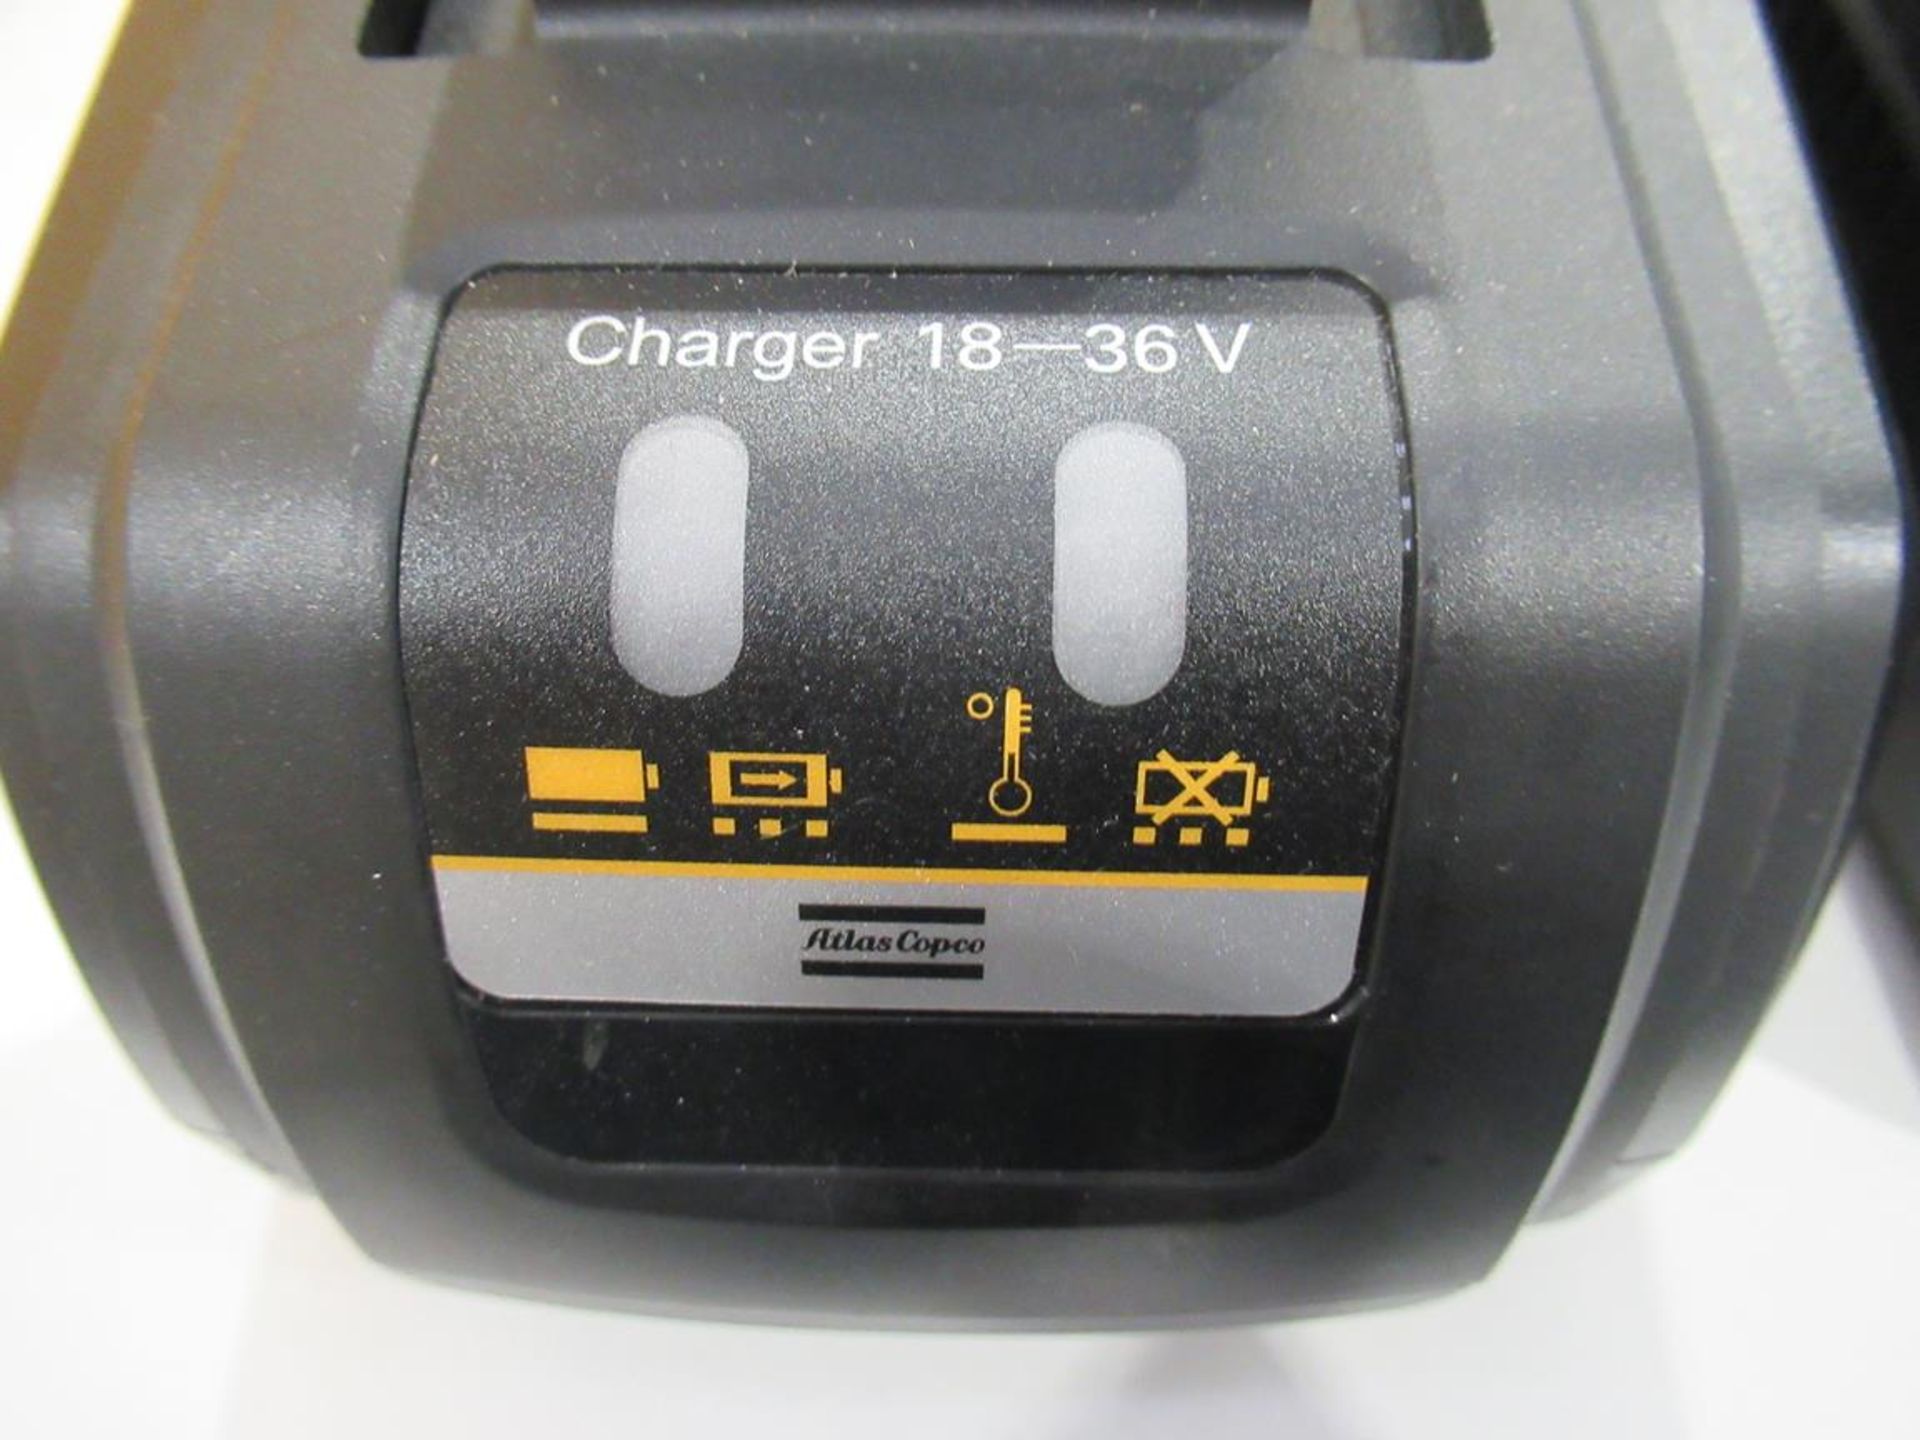 2x (no.) Atlas Copco, A485 chargers (used) - Image 2 of 4